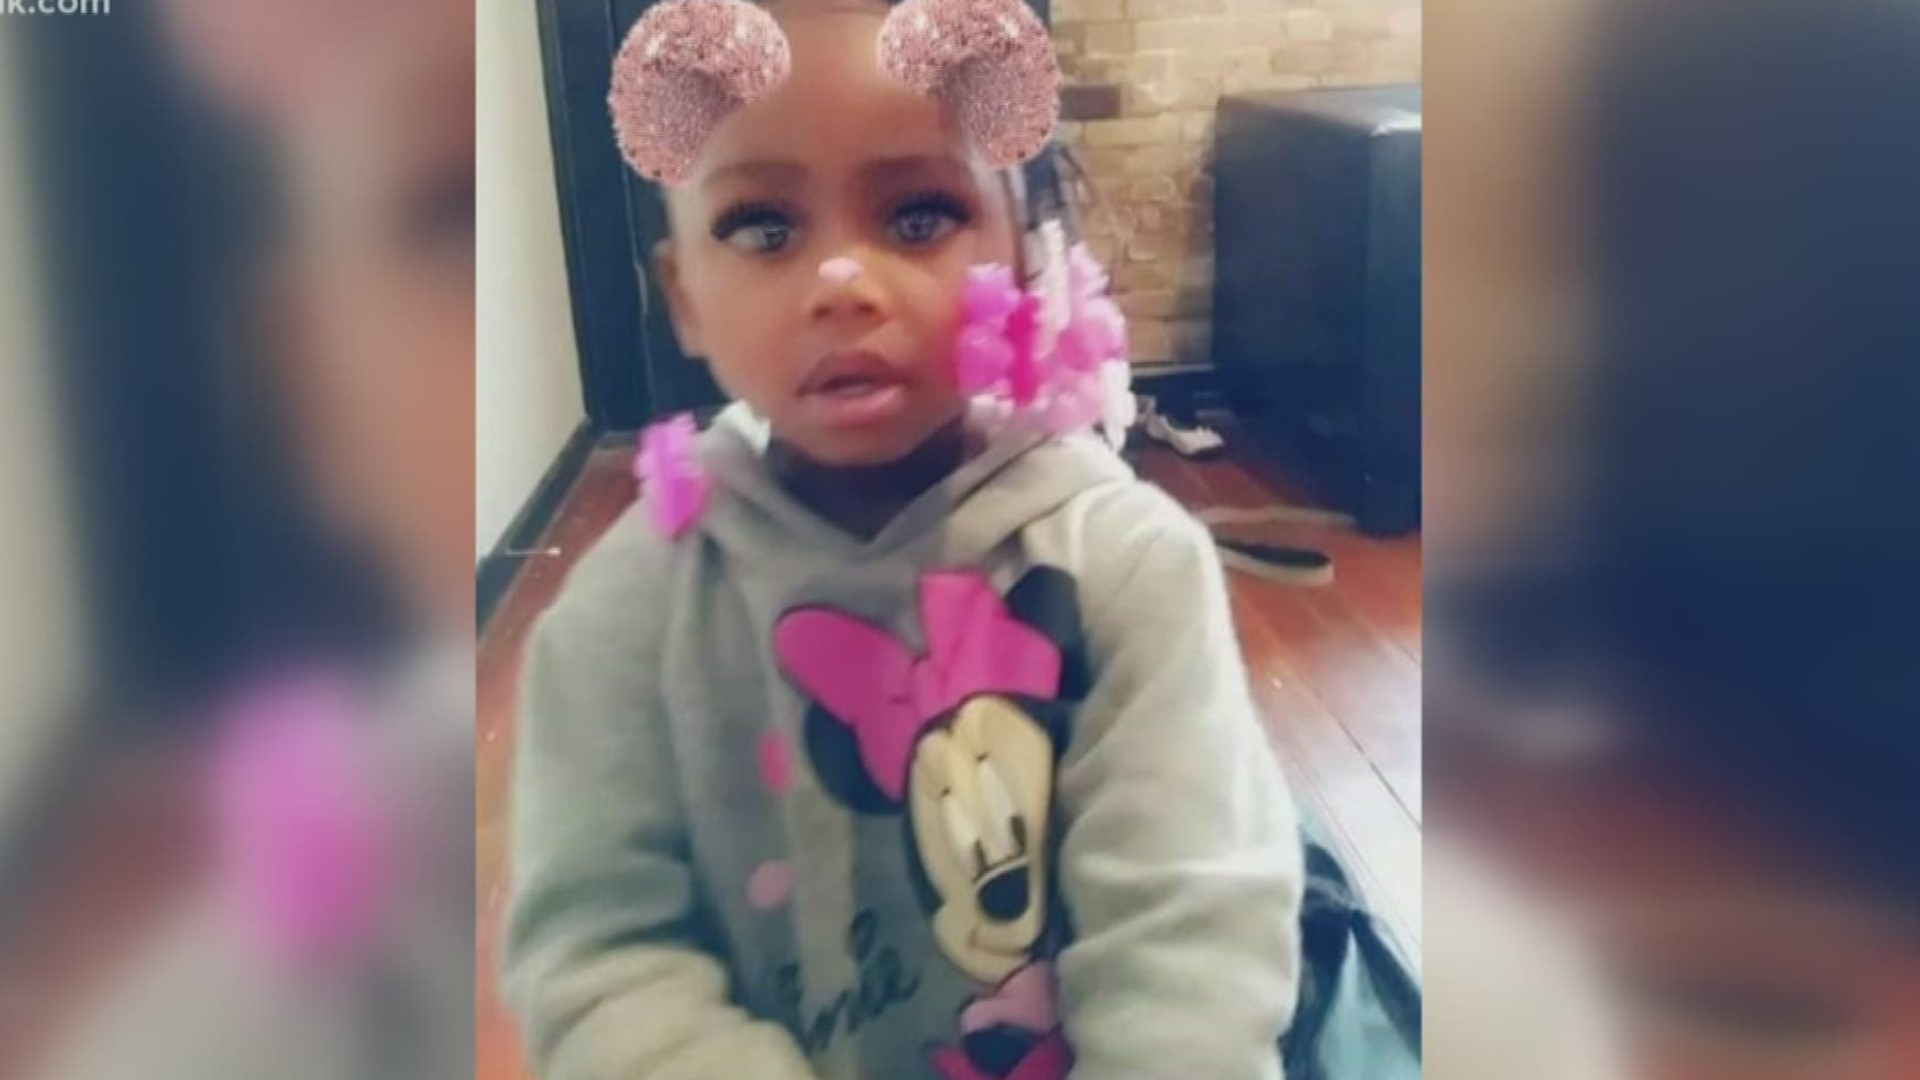 A 3-year-old died after a drive-by shooting in south St. Louis Sunday night. 5 On Your Side's Justina Coronel reports.